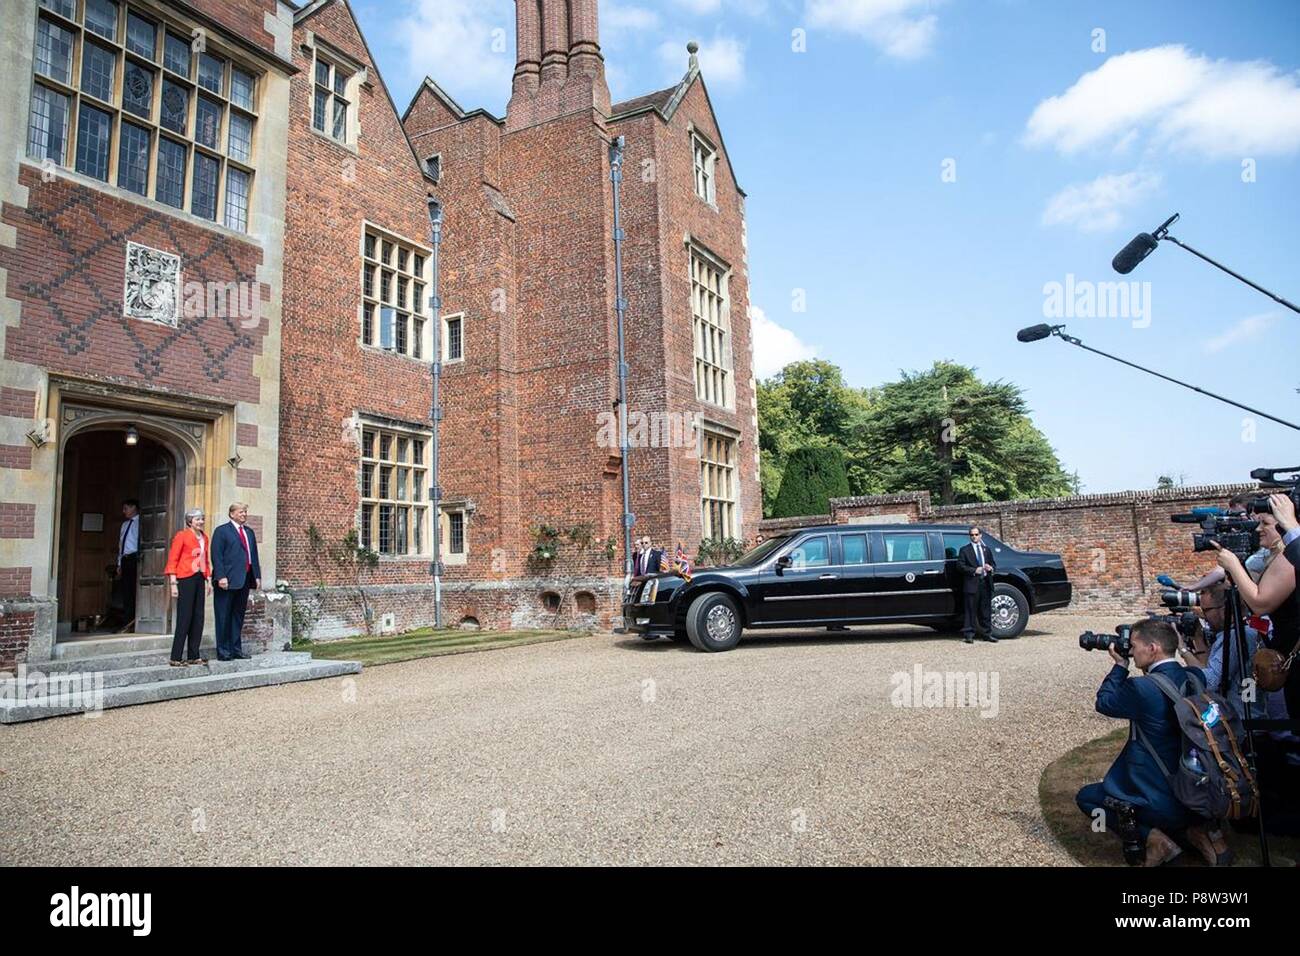 London, UK, 13 July 2018. U.S President Donald Trump is greeted by Prime Minister Theresa May on arrival for bilateral talks at Chequers July 12, 2018 in Buckinghamshire, England. Chequers is the country residence of the Prime Minister. Credit: Planetpix/Alamy Live News Stock Photo